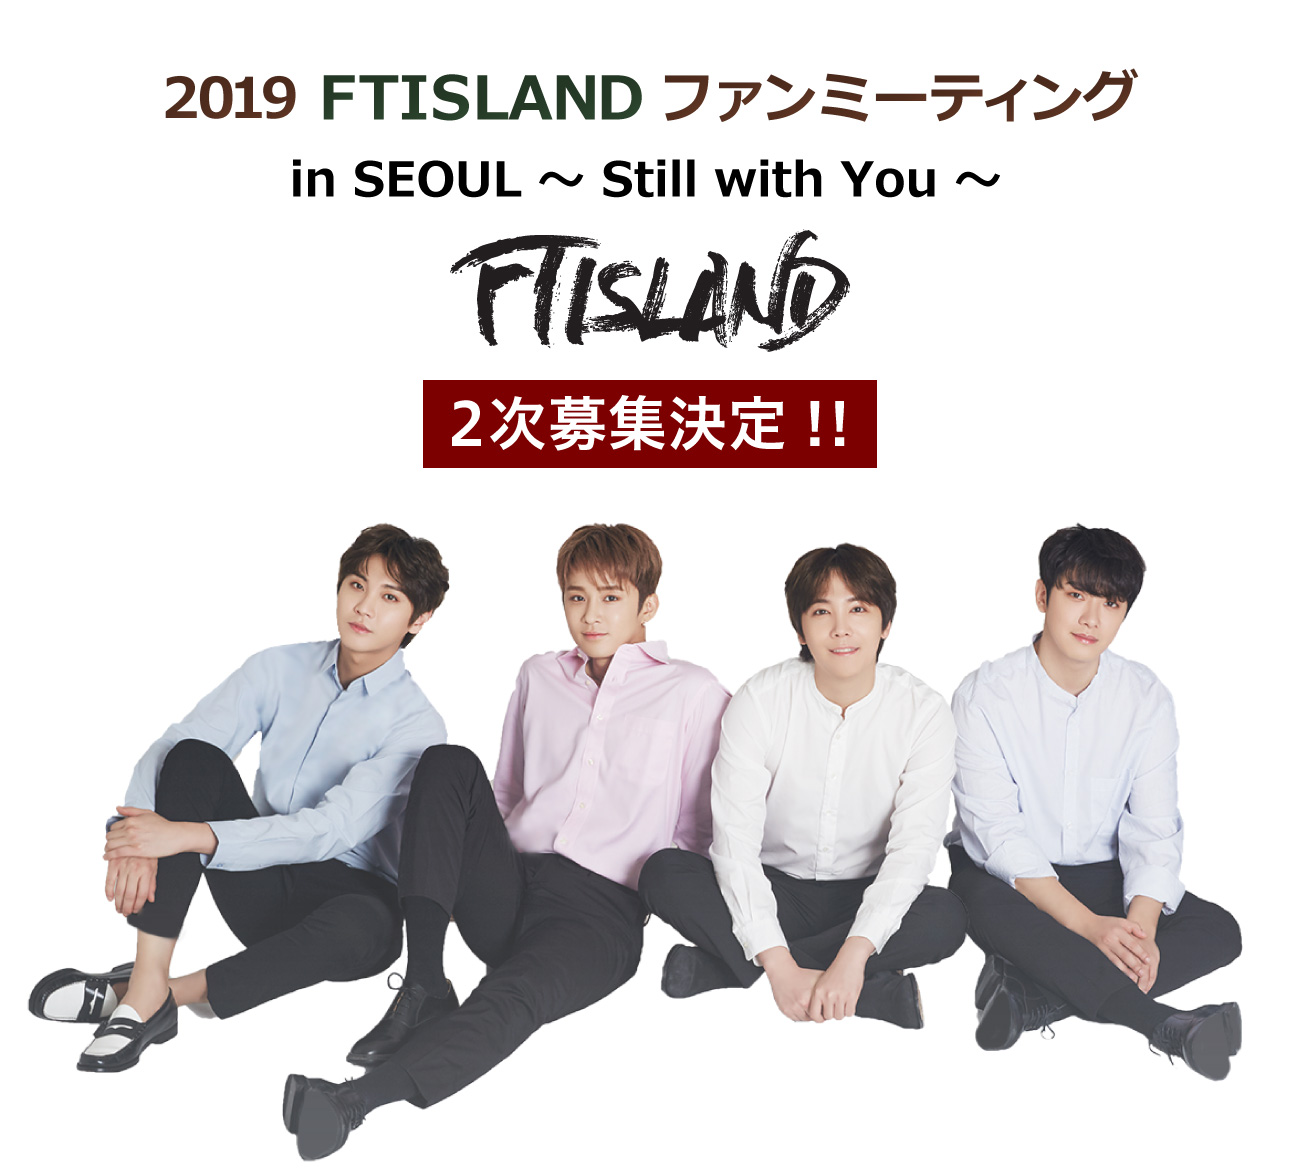 2019 FTISLAND ファンミーティング in SEOUL ～ Still with You ～